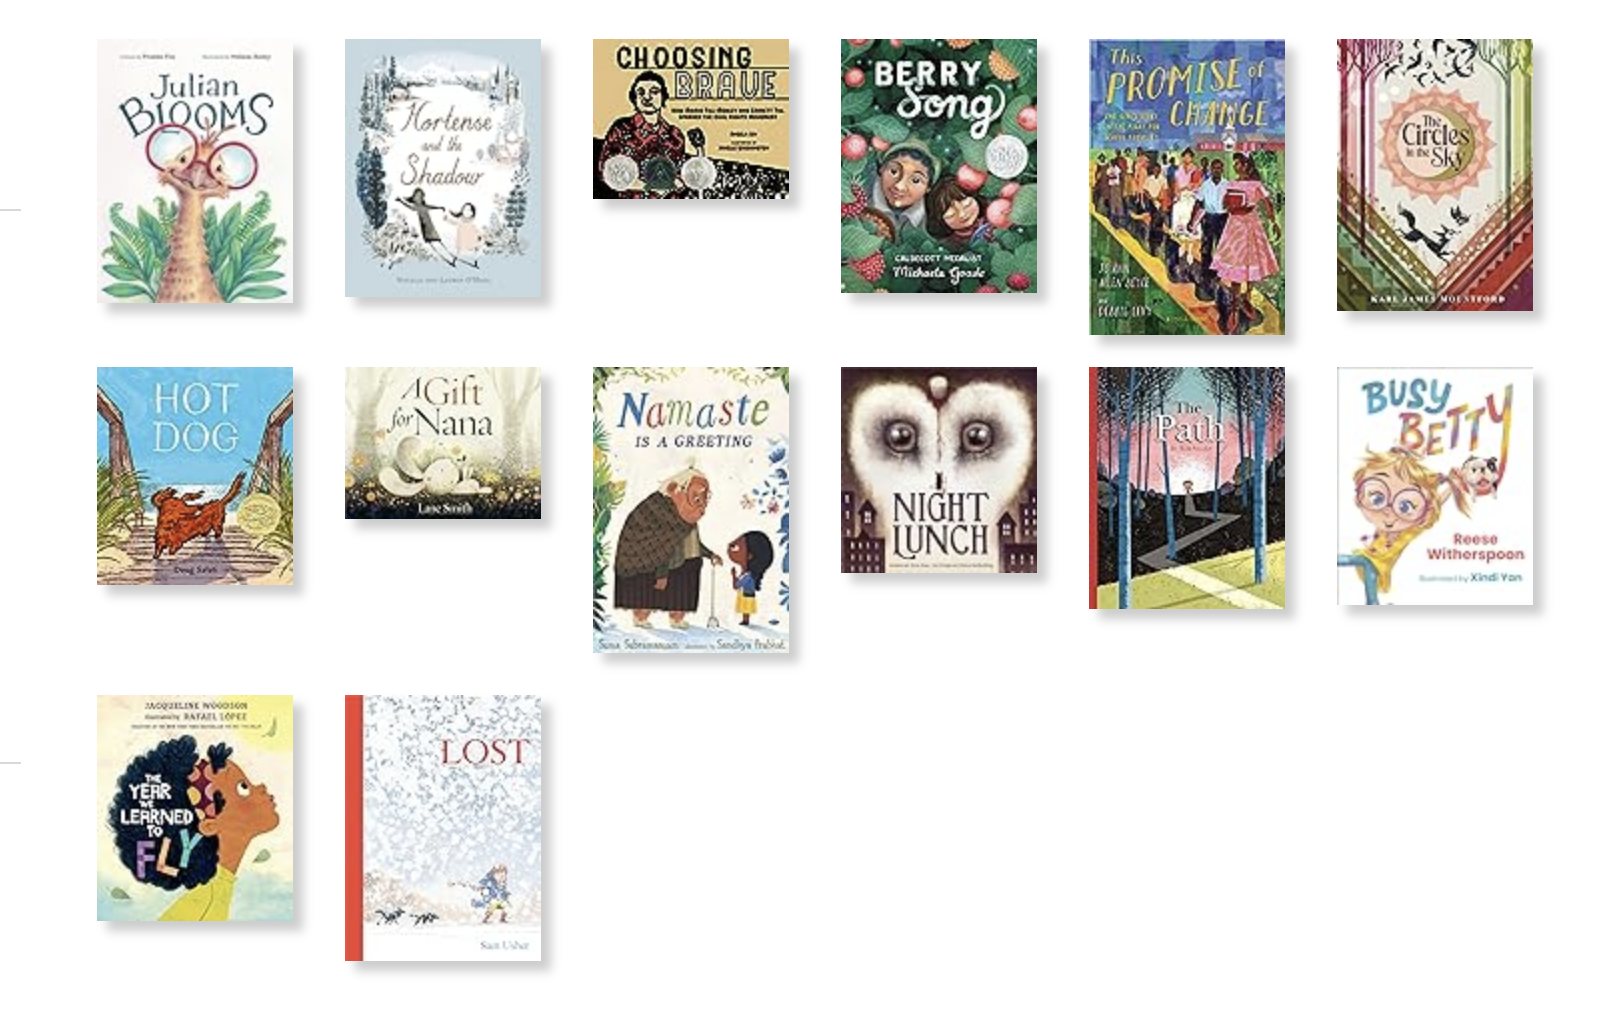 Image from Goodreads showing the covers of the picture books Sharon read and tracked this year.